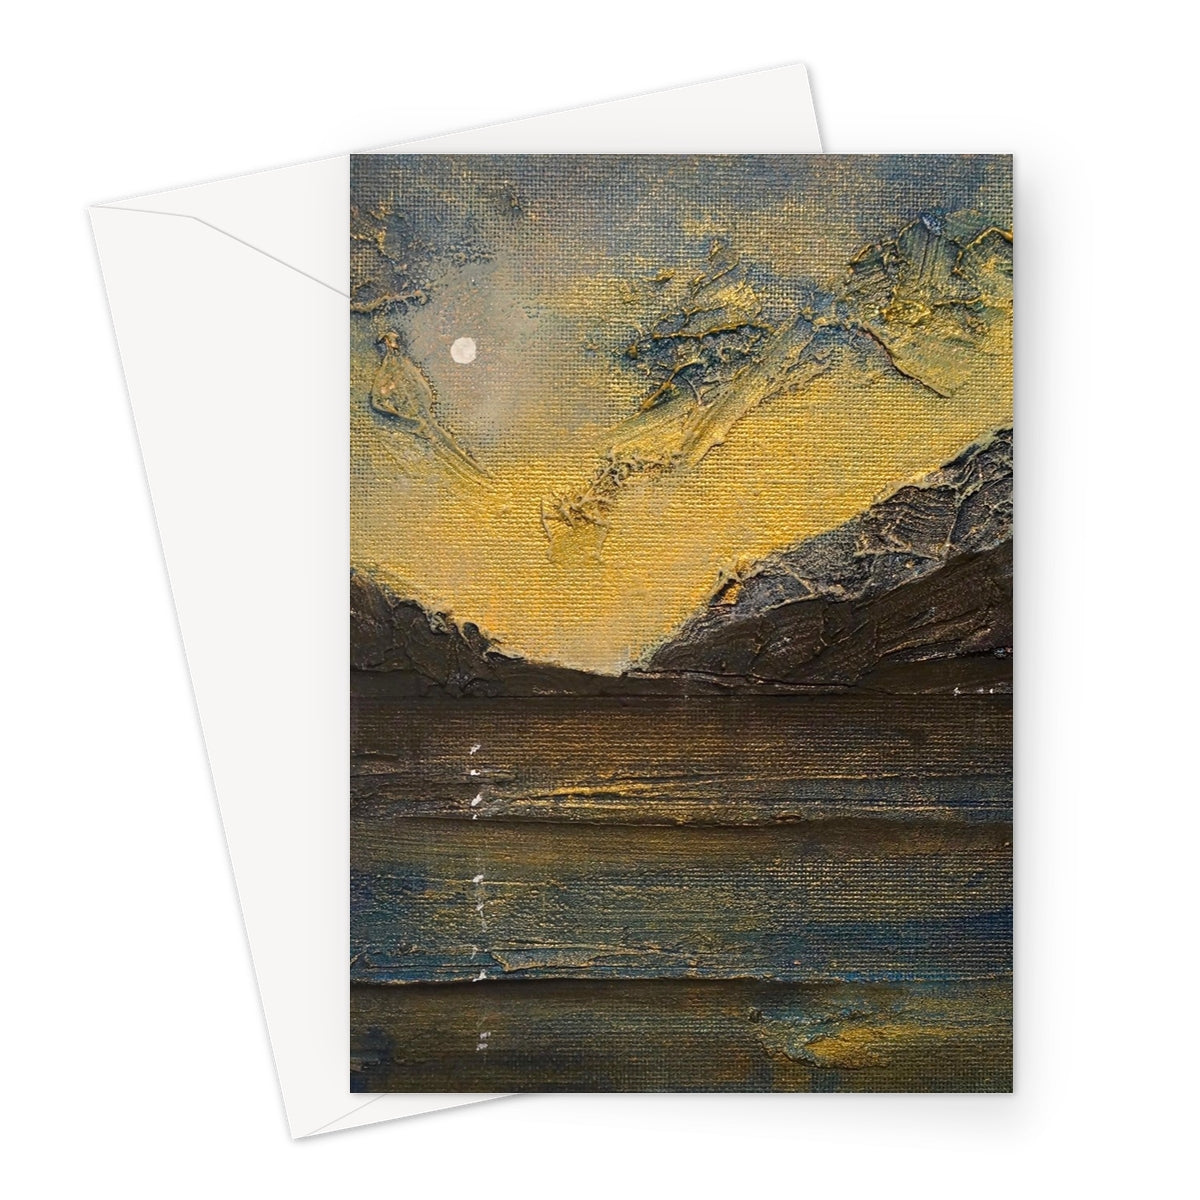 Loch Lomond Moonlight Art Gifts Greeting Card-Stationery-Scottish Lochs & Mountains Art Gallery-A5 Portrait-1 Card-Paintings, Prints, Homeware, Art Gifts From Scotland By Scottish Artist Kevin Hunter